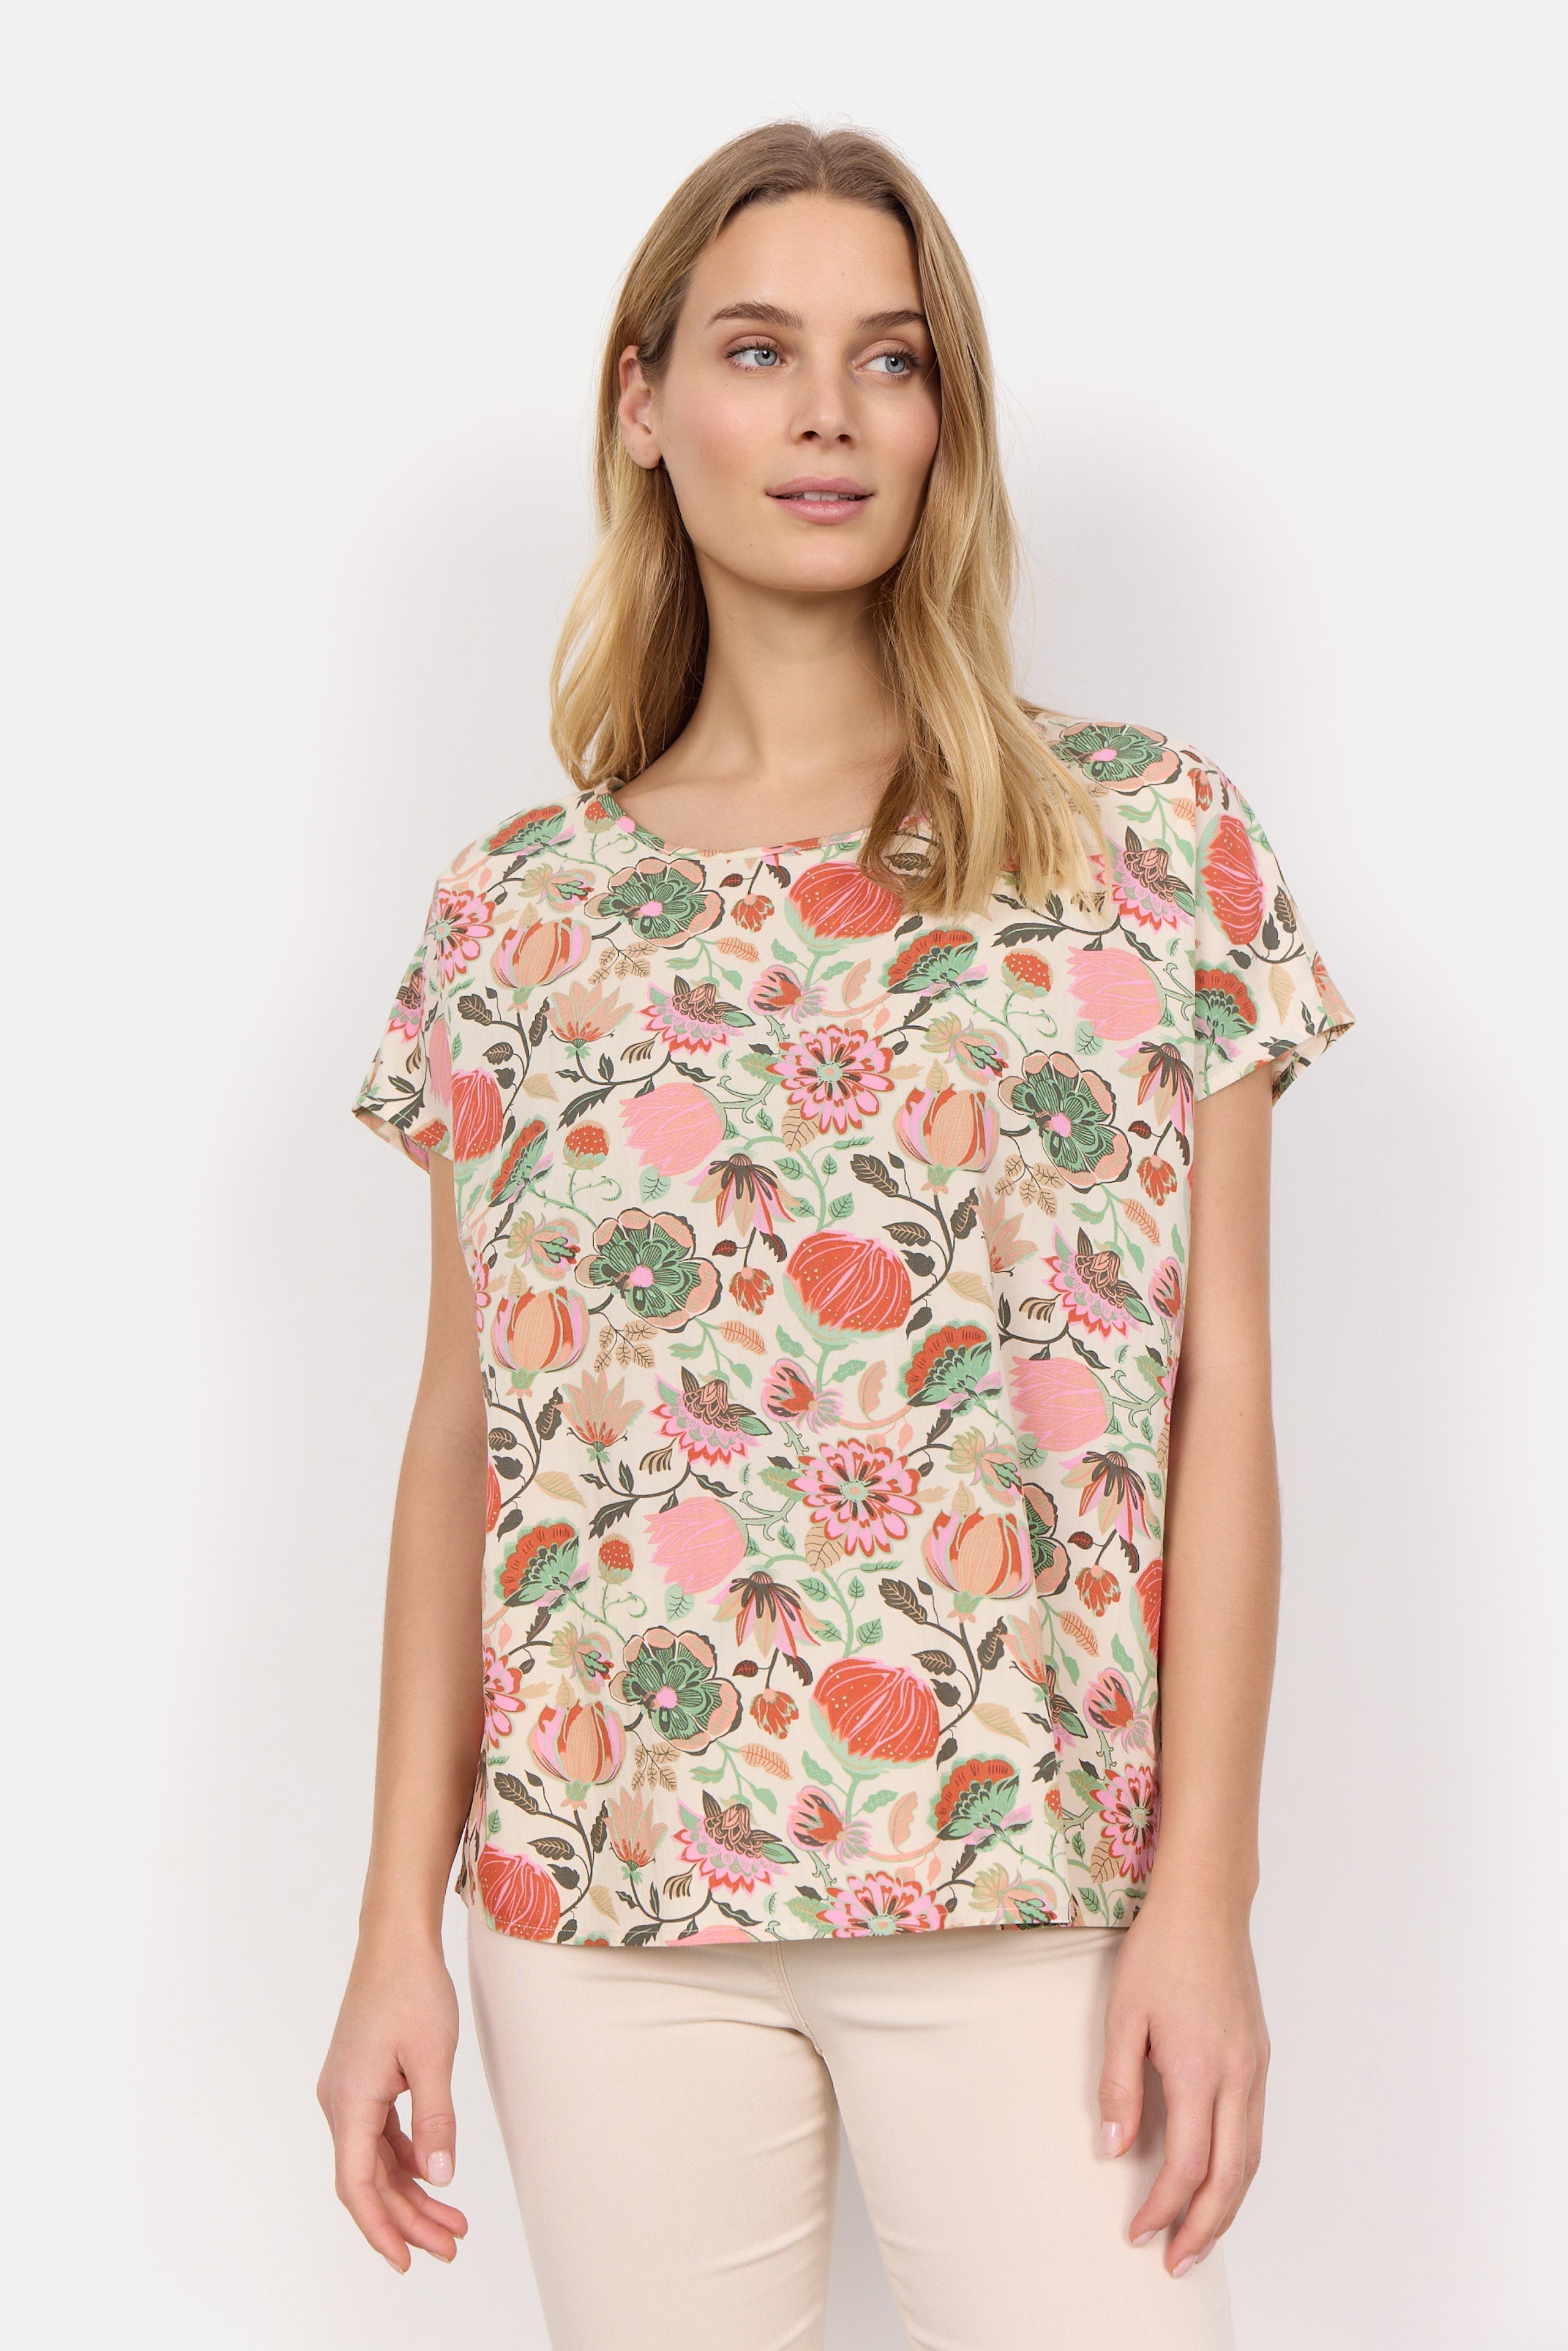 Front view of Soya Concept (40579) Women's Short Sleeve Graphic Floral Blouse in a Peach Floral Print With PInk & Green Hues over a Cream Background 